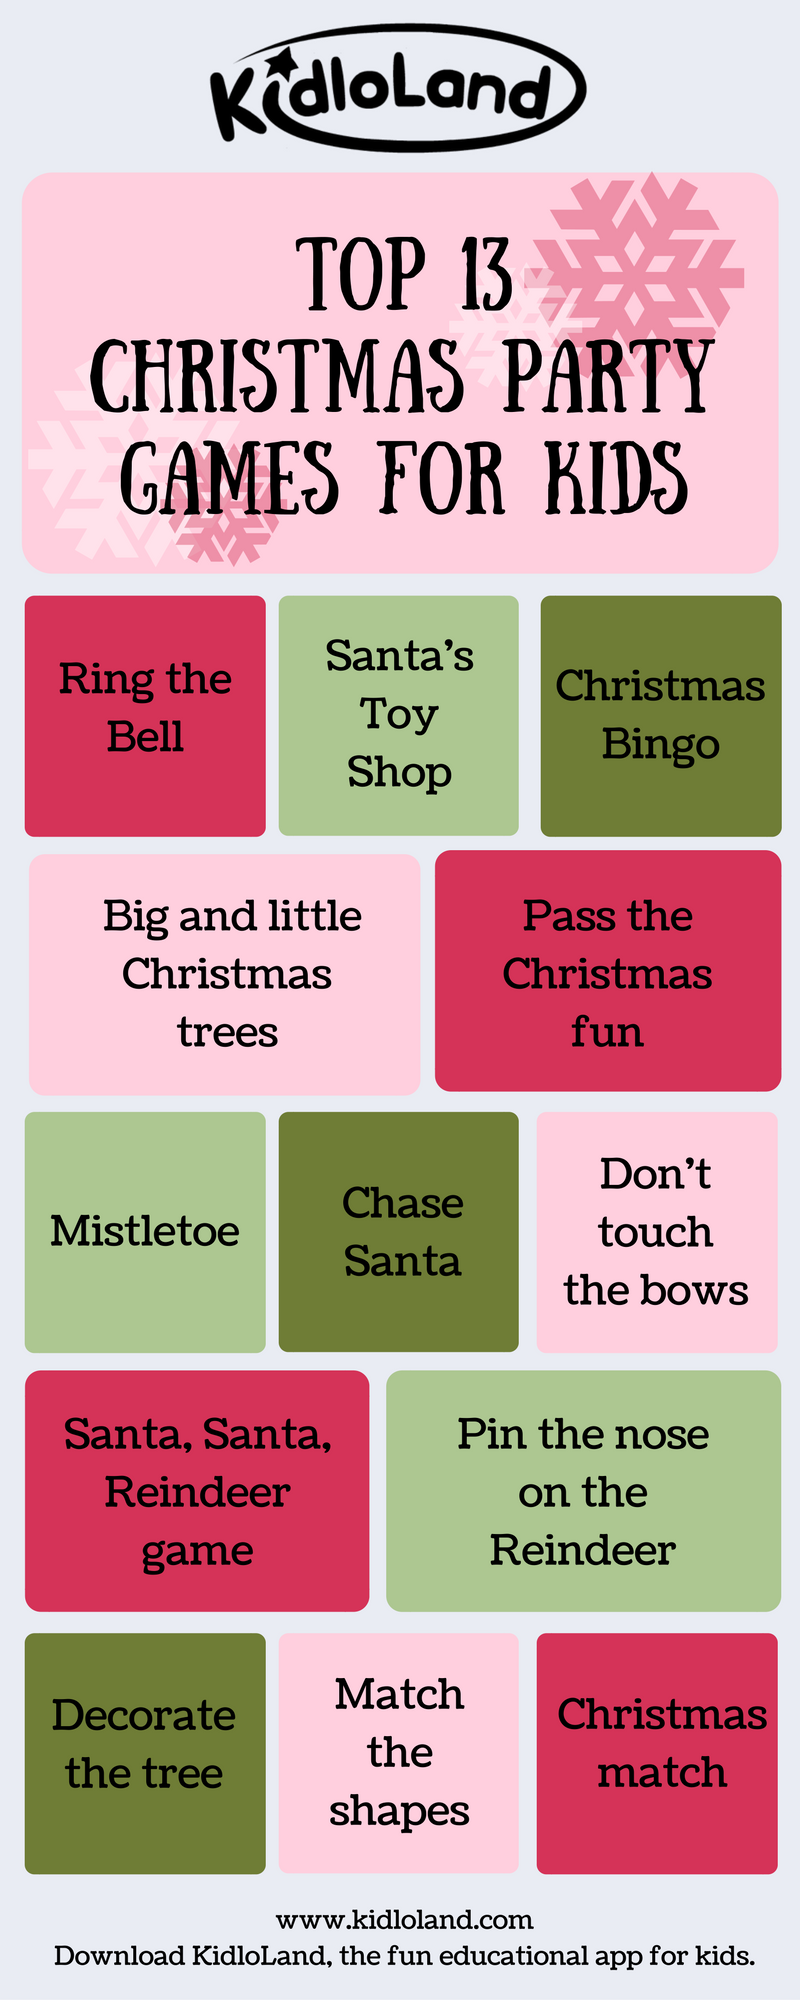 the-top-13-christmas-party-games-for-kids